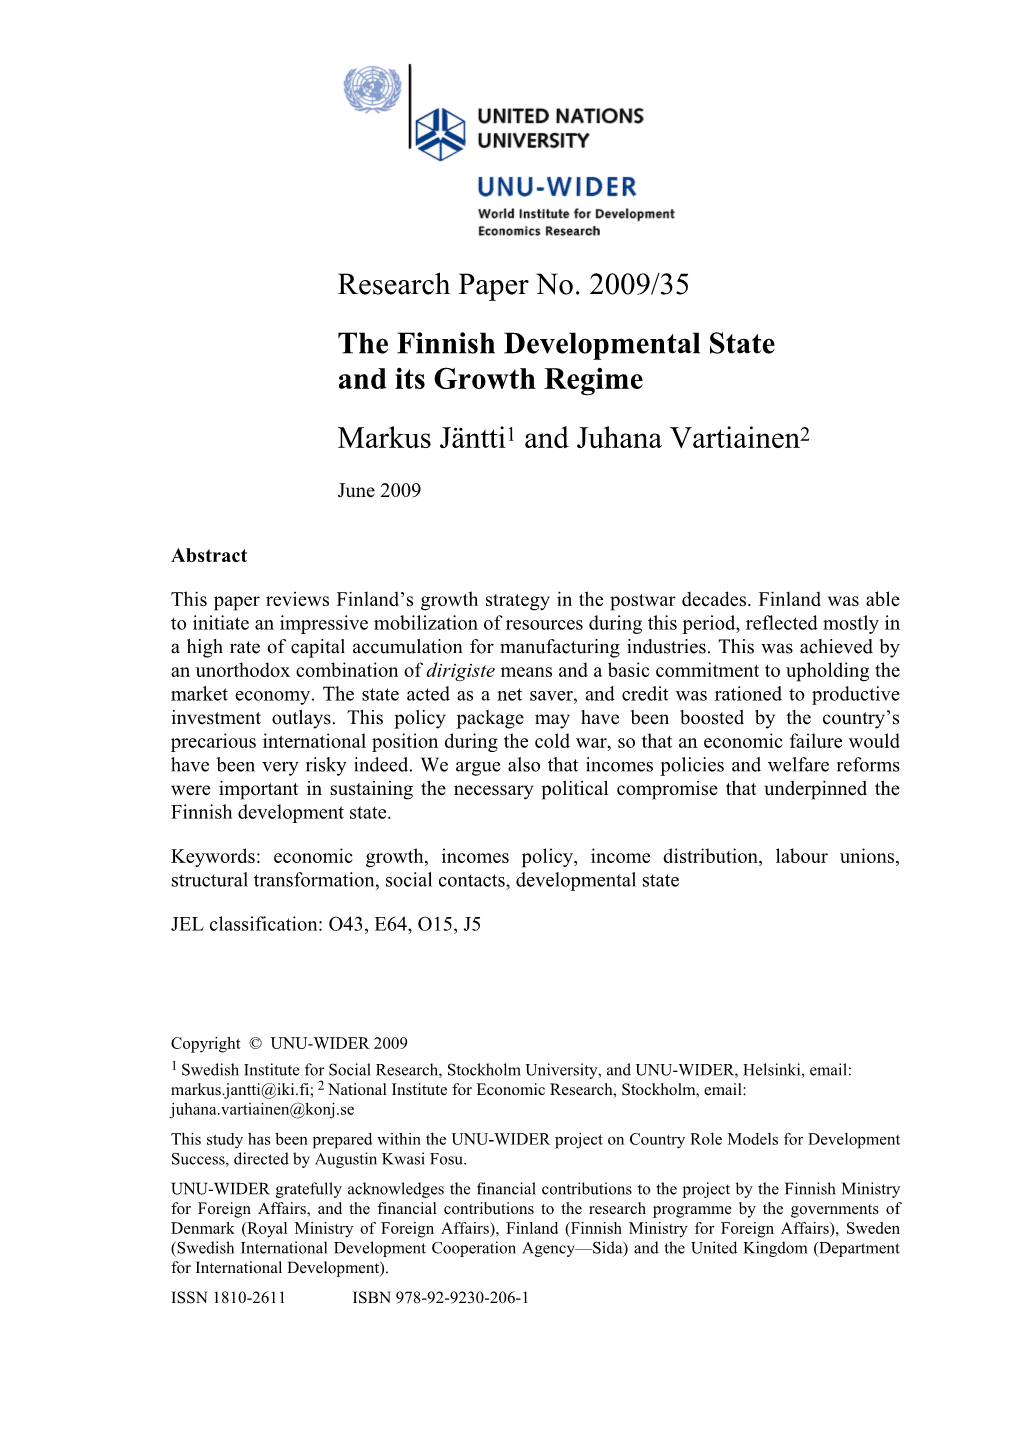 Research Paper No. 2009/35 the Finnish Developmental State And